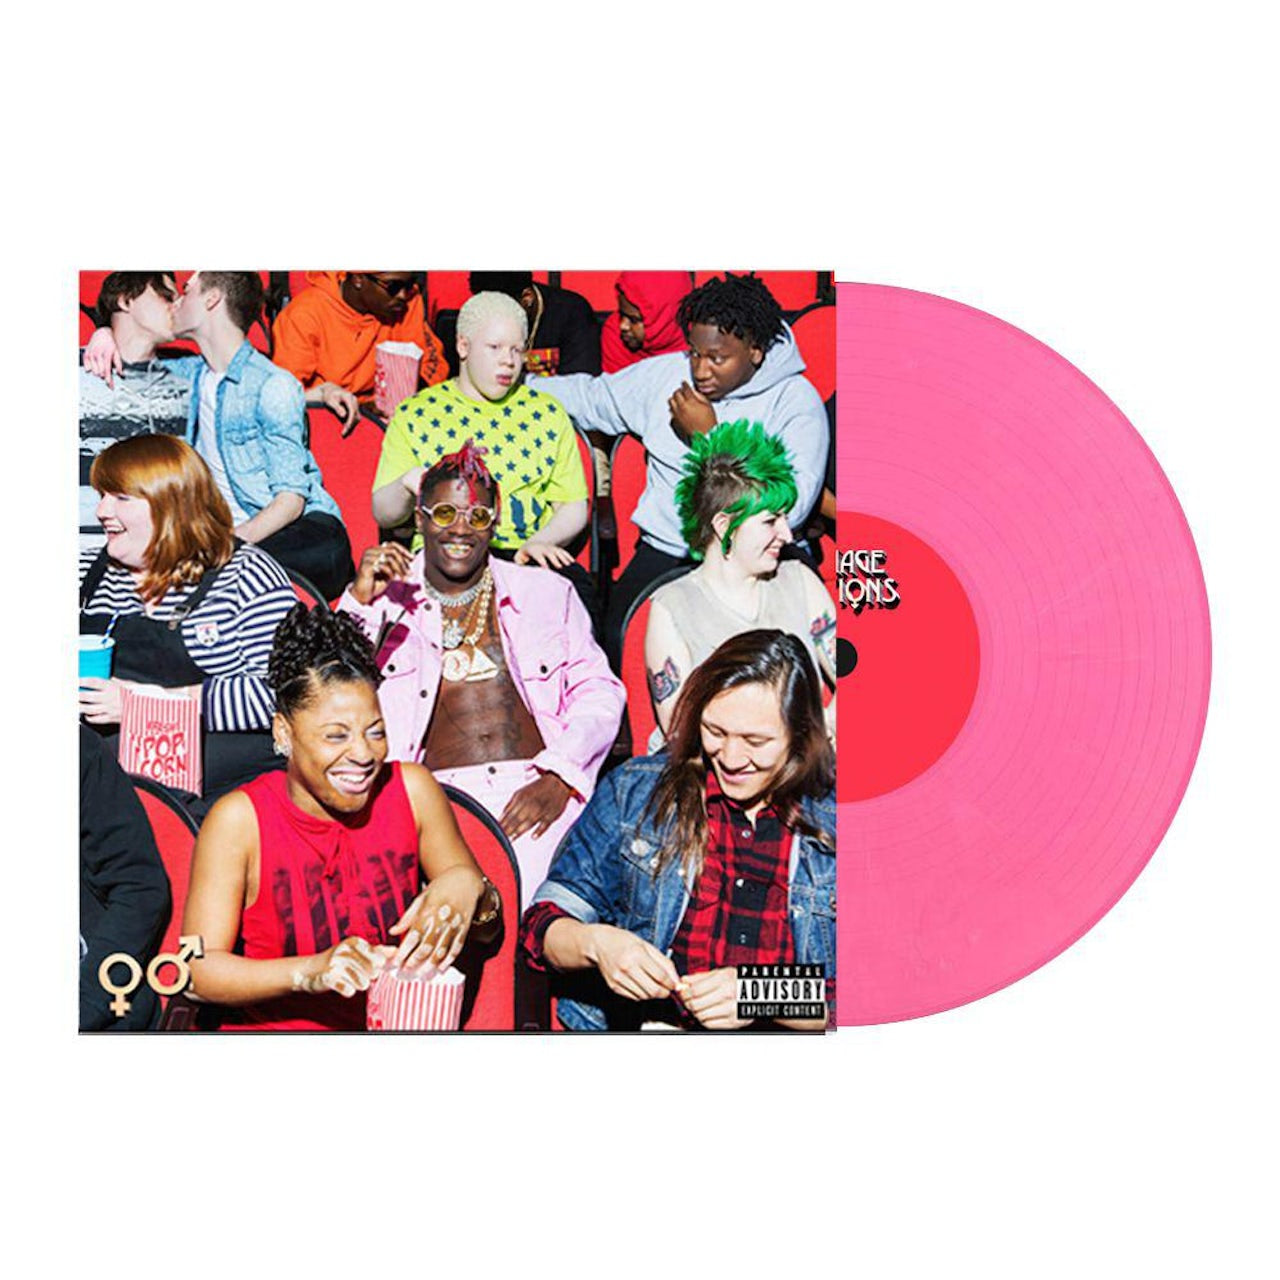 Lil yachty teenage emotions album on pink variant color vinyl LP record